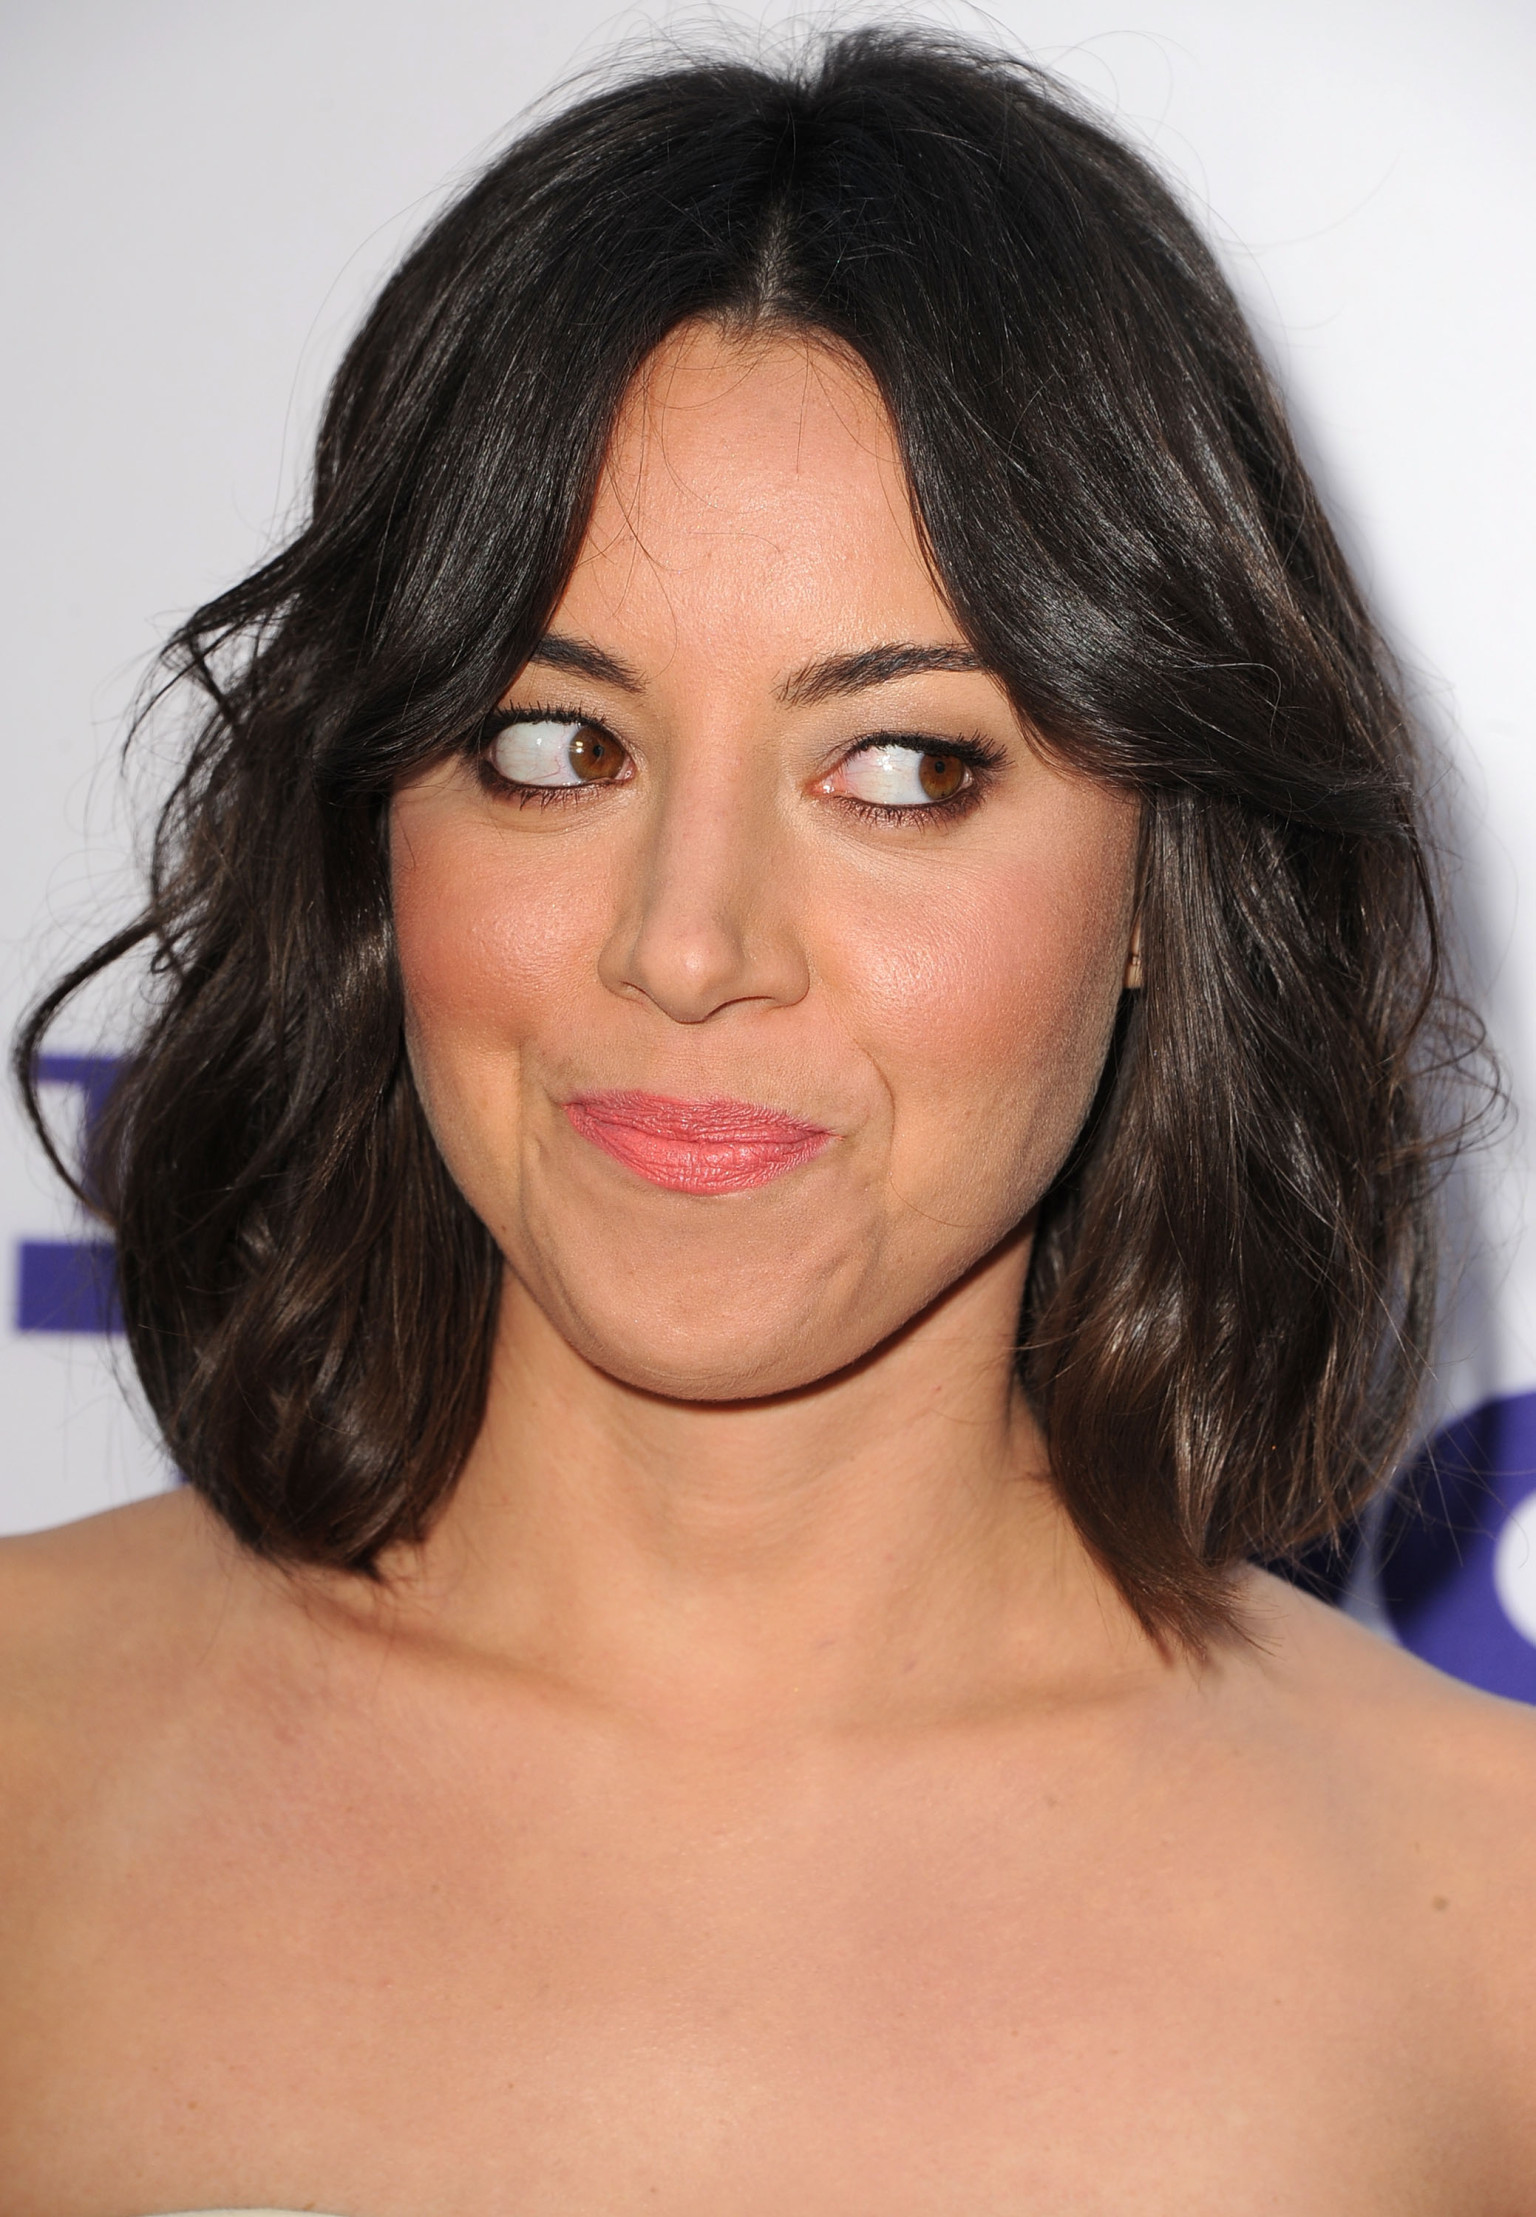 Why We Should All Aspire To Be Like Aubrey Plaza Huffpost